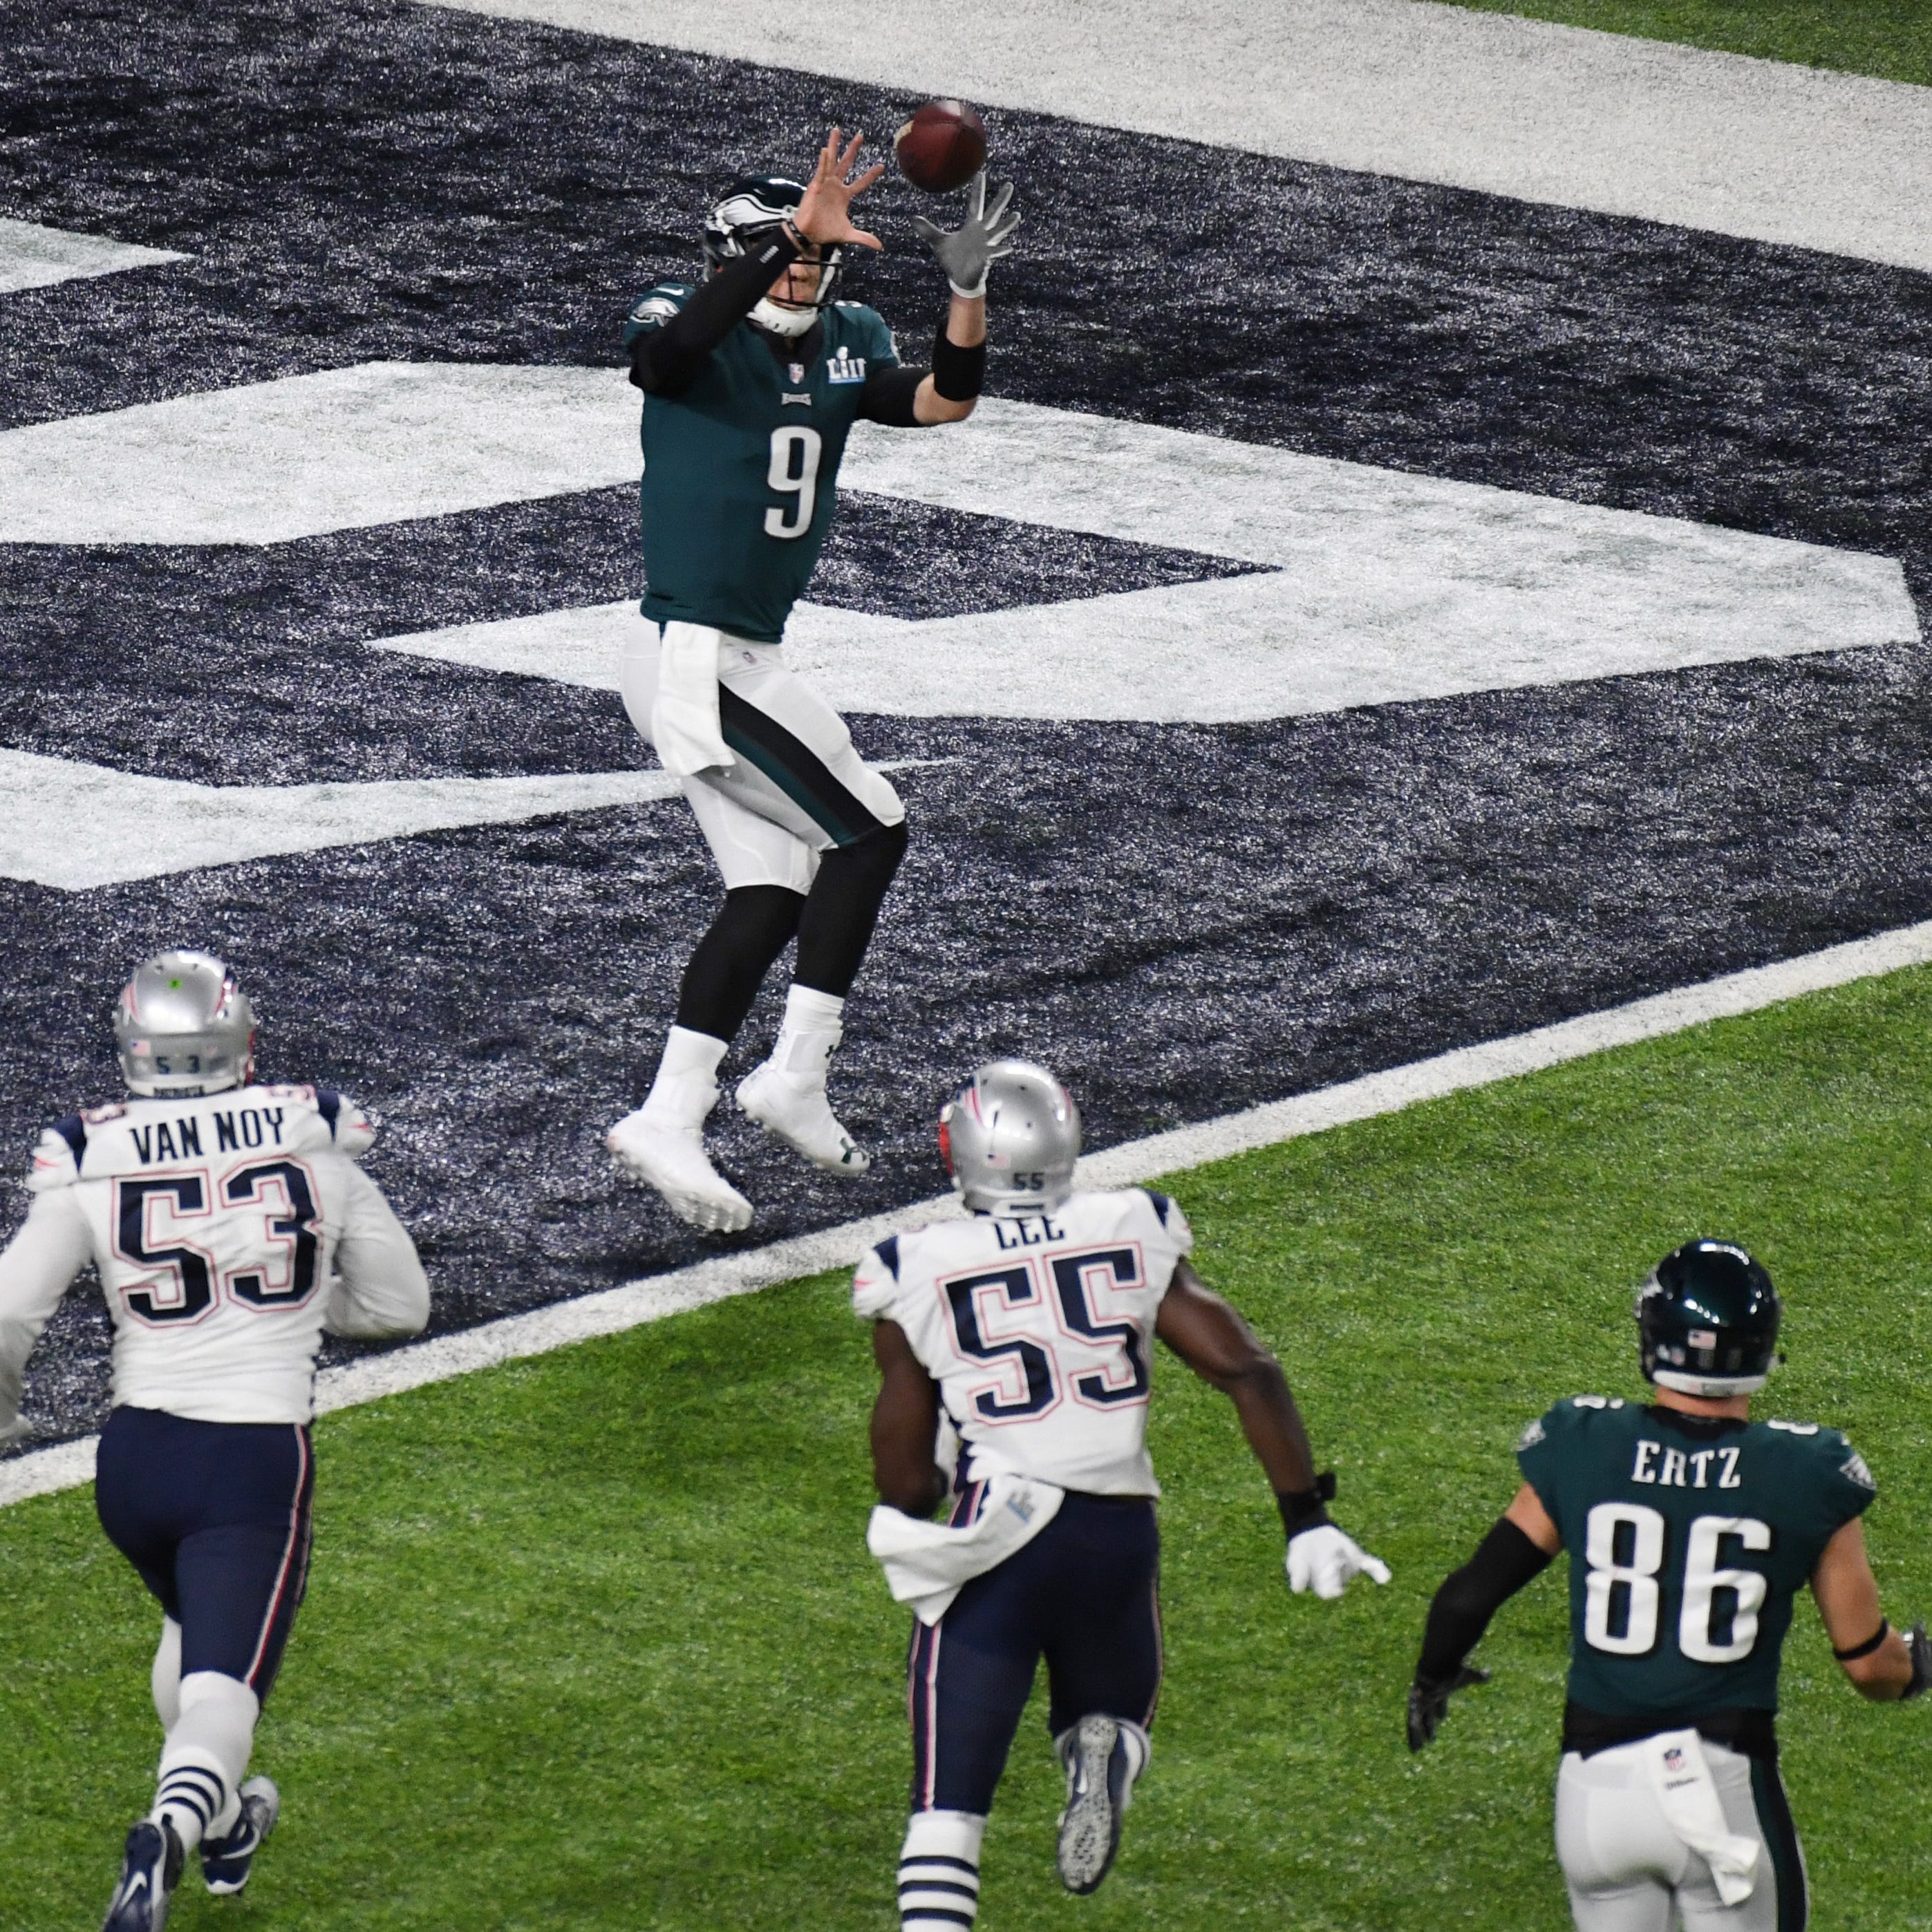 Philadelphia Eagles quarterback Nick Foles (9) catches a touchdown pass against the New England Patriots in the second quarter in Super Bowl 52 at U.S. Bank Stadium.